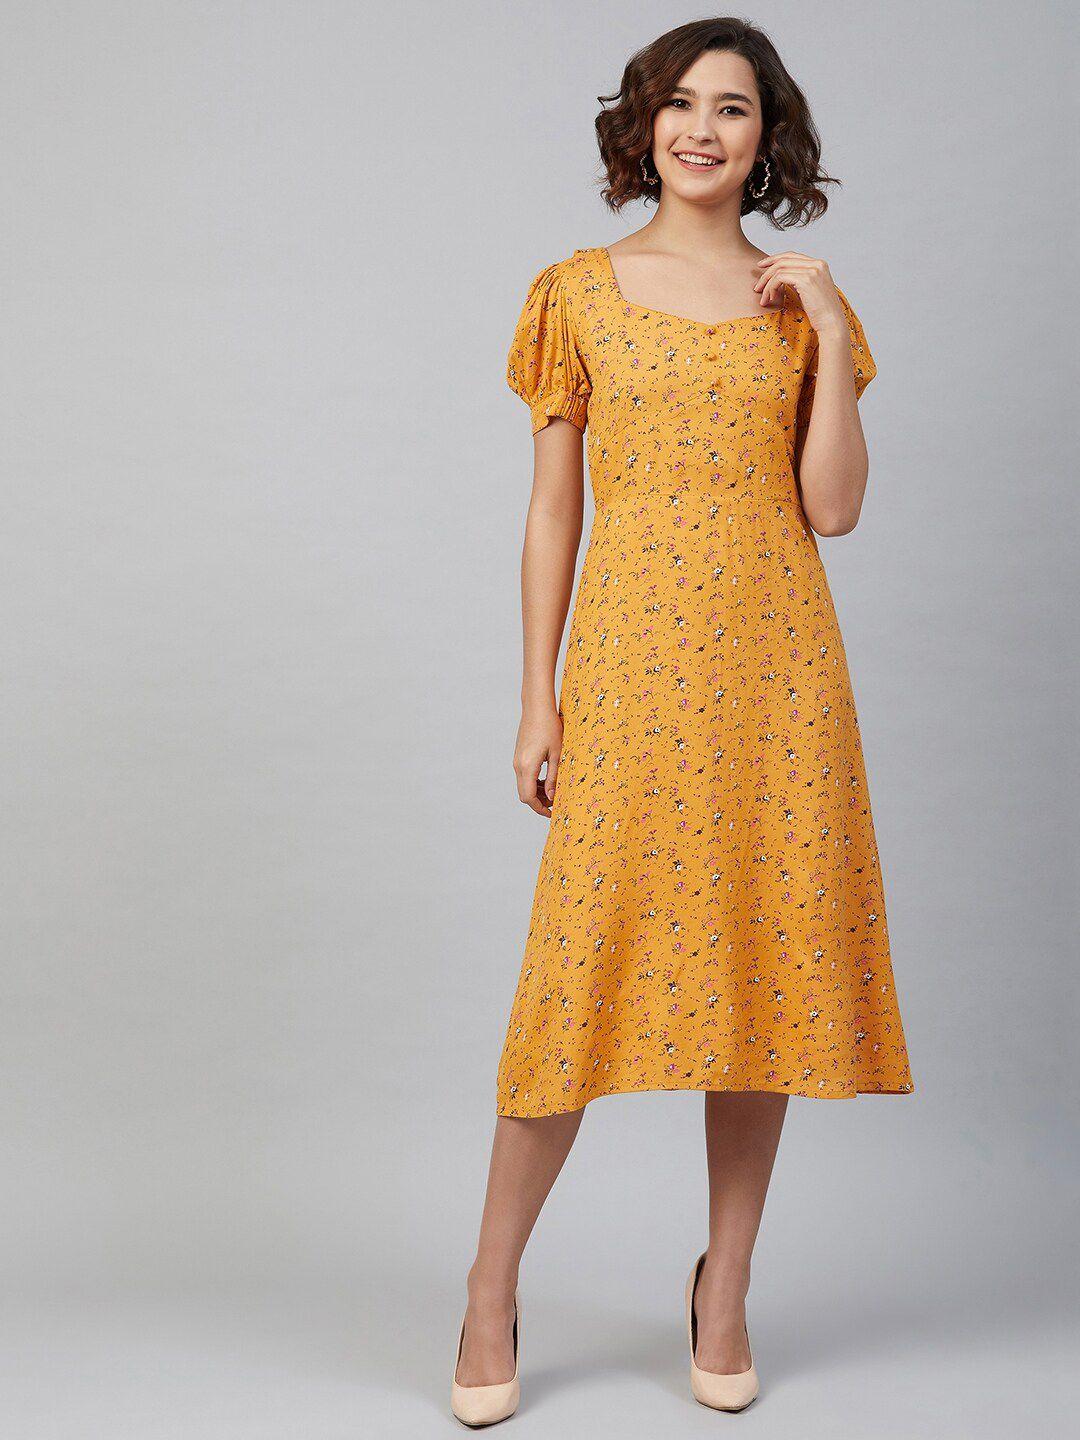 marie-claire-mustard-yellow-floral-print-puff-sleeve-a-line-midi-dress